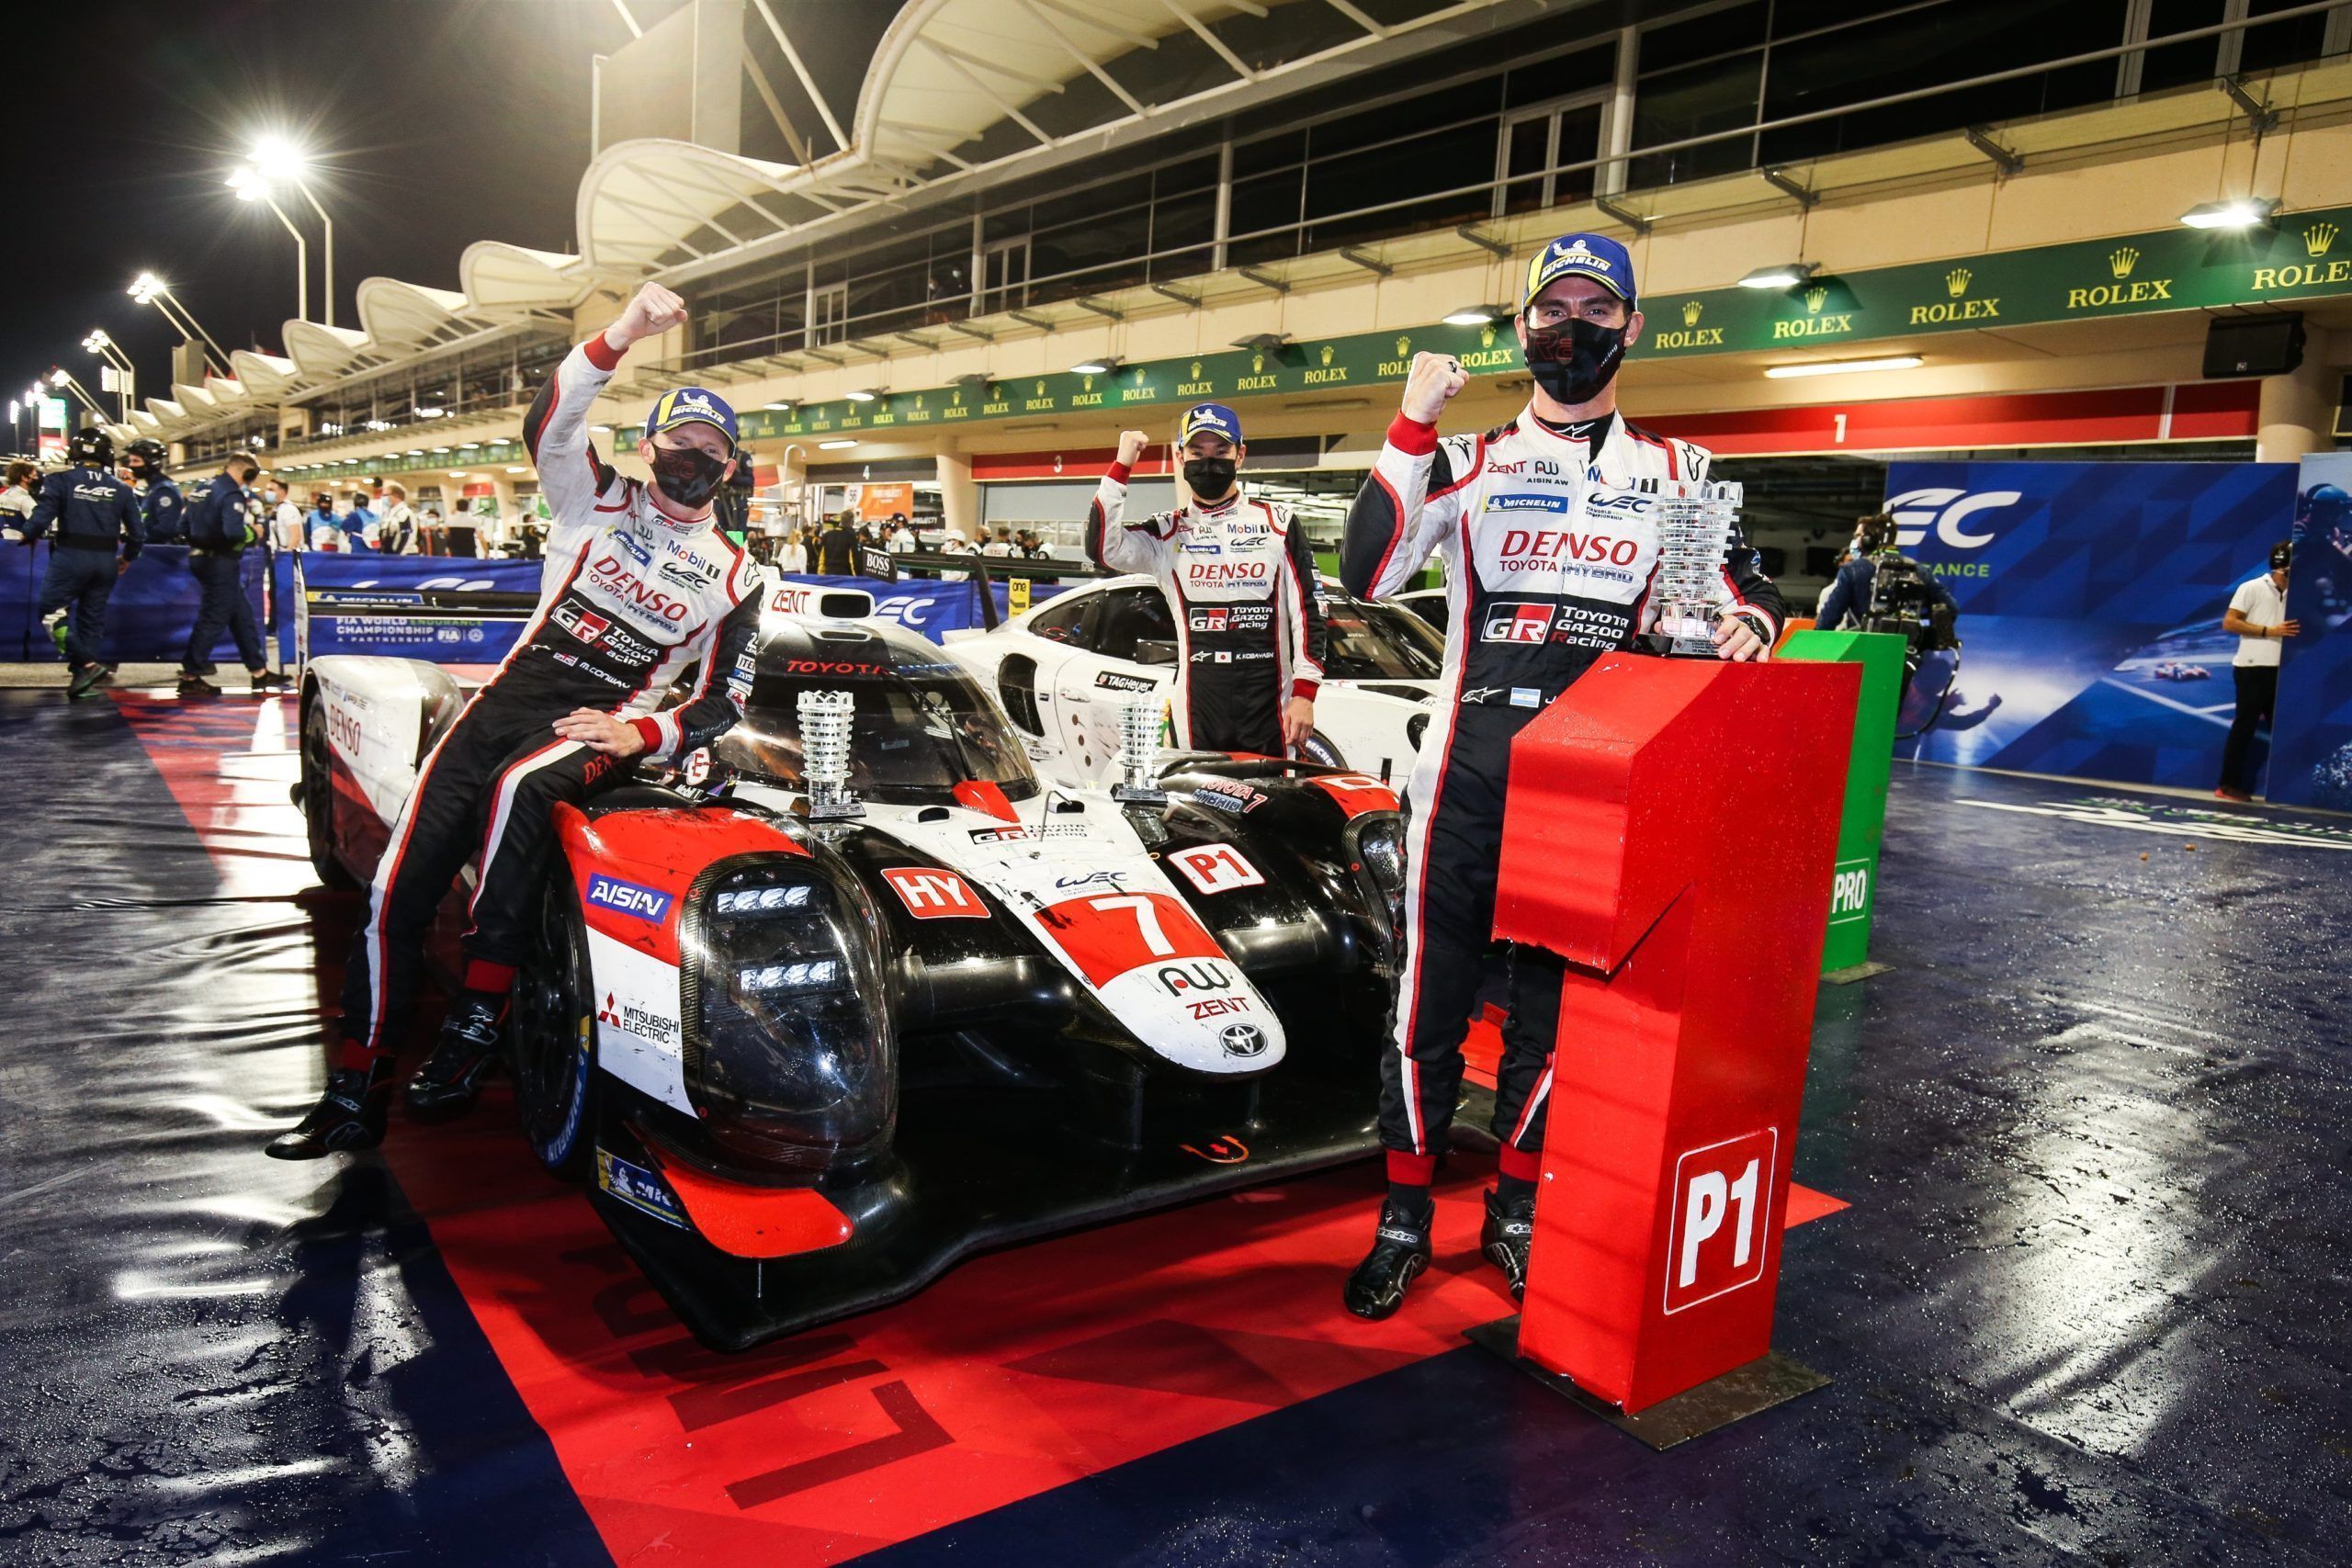 WEC to debut daylight race at Bahrain in October